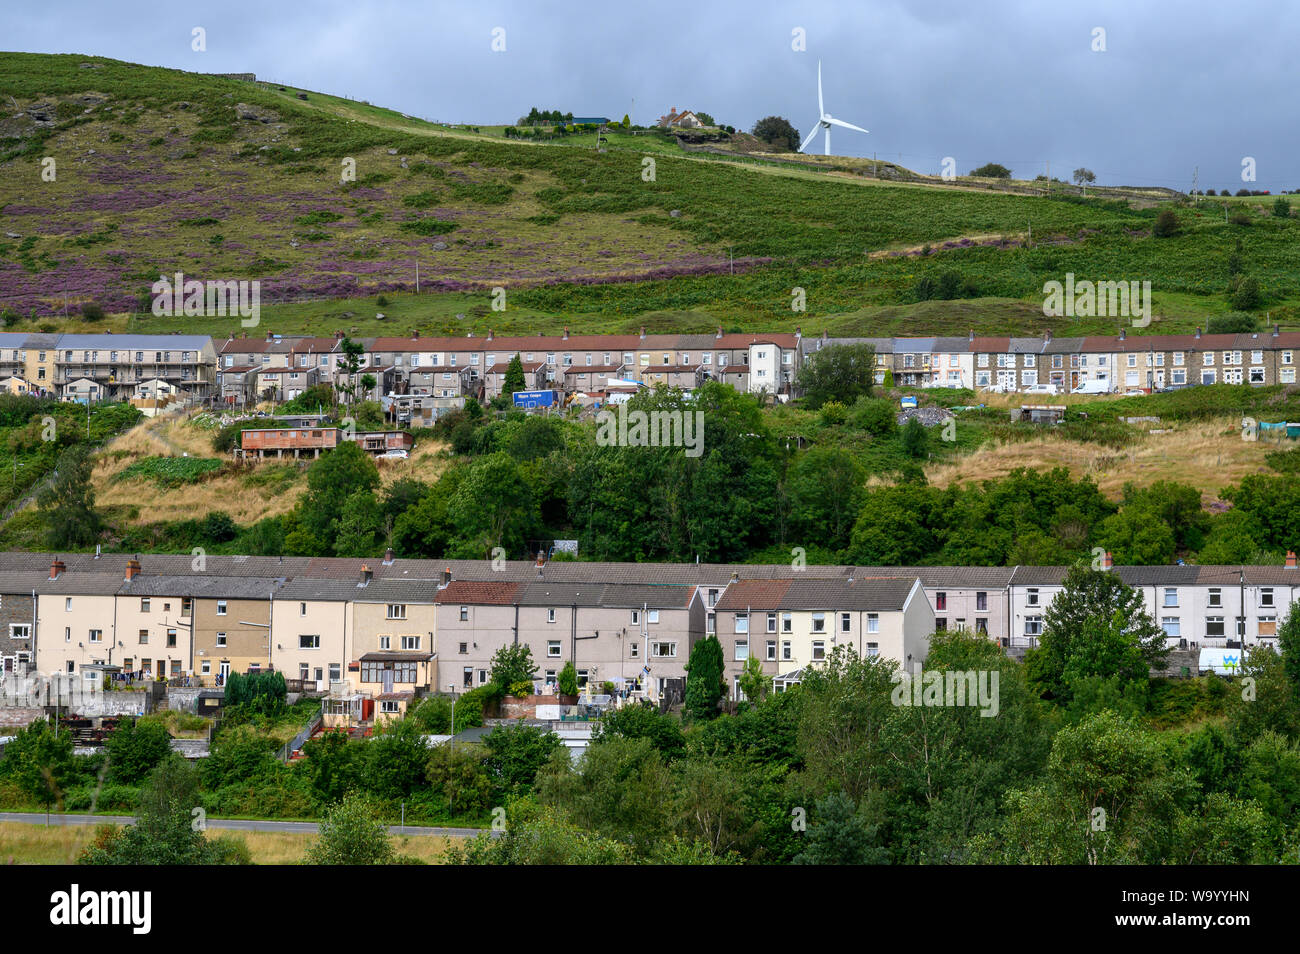 The terraced houses of Cwmsyfiog, New Tredegar, South Wales UK cling to the green mountainside. Stock Photo